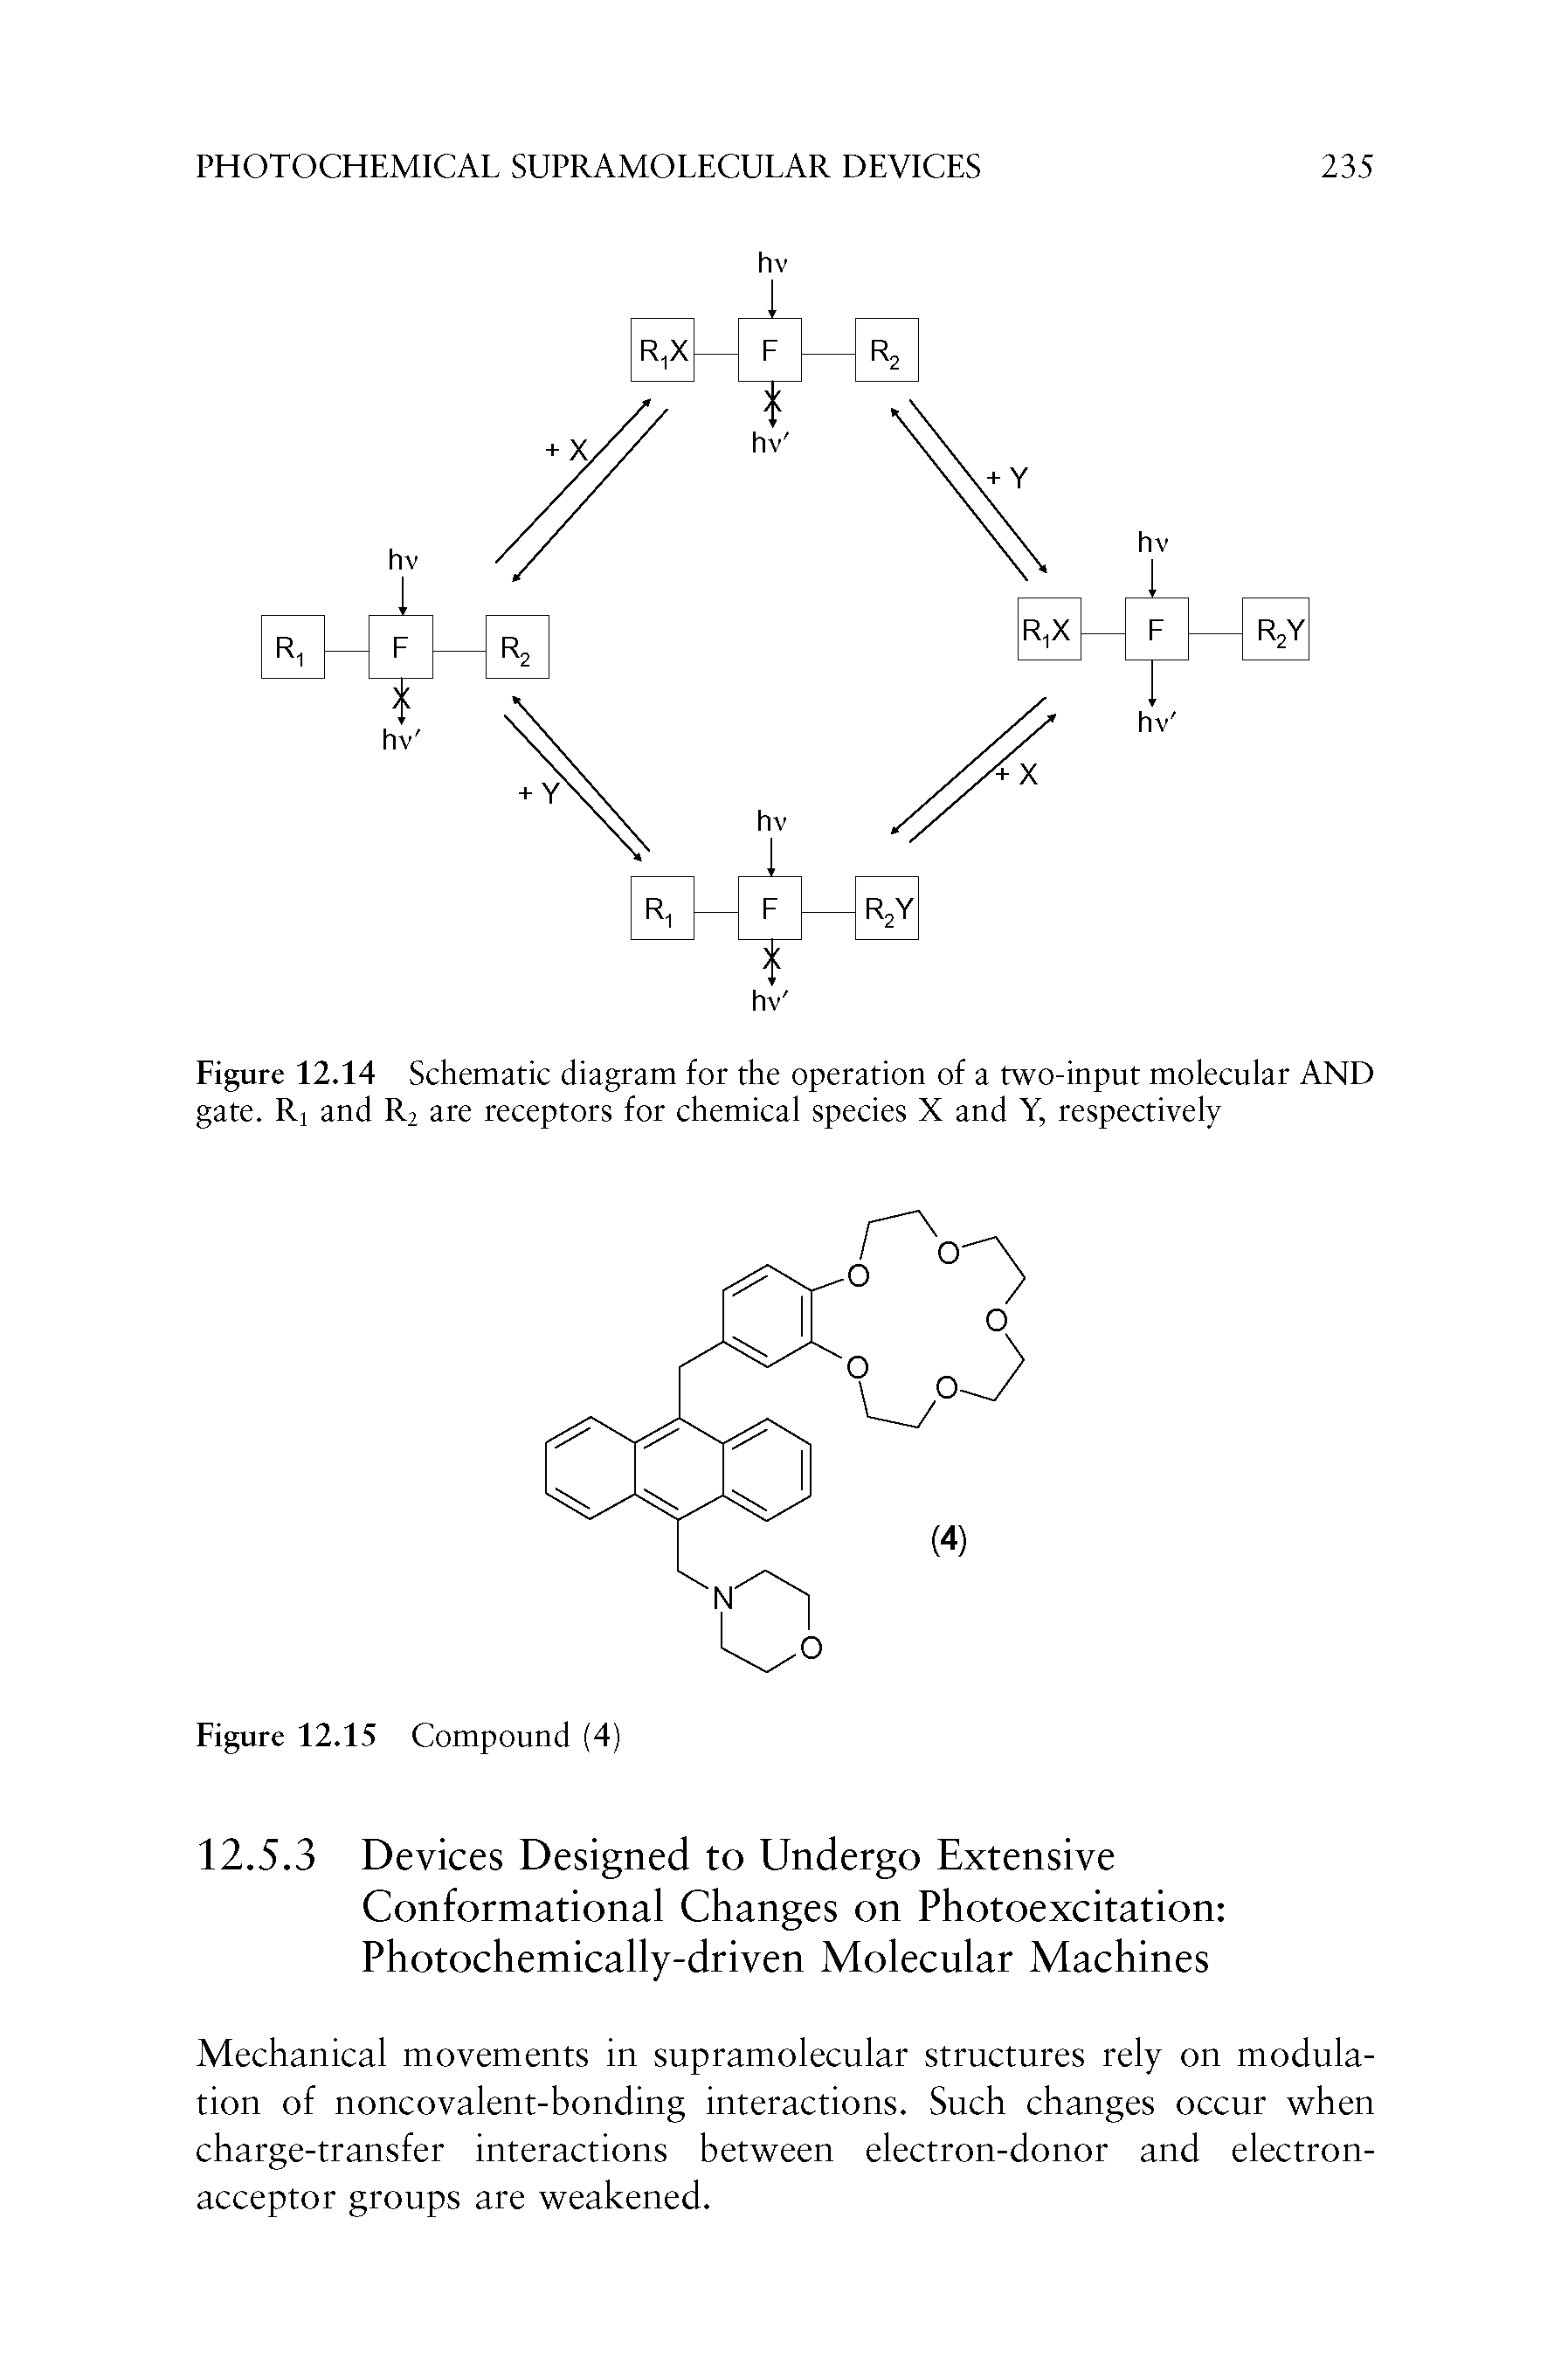 Figure 12.14 Schematic diagram for the operation of a two-input molecular AND gate. Ri and R2 are receptors for chemical species X and Y, respectively...